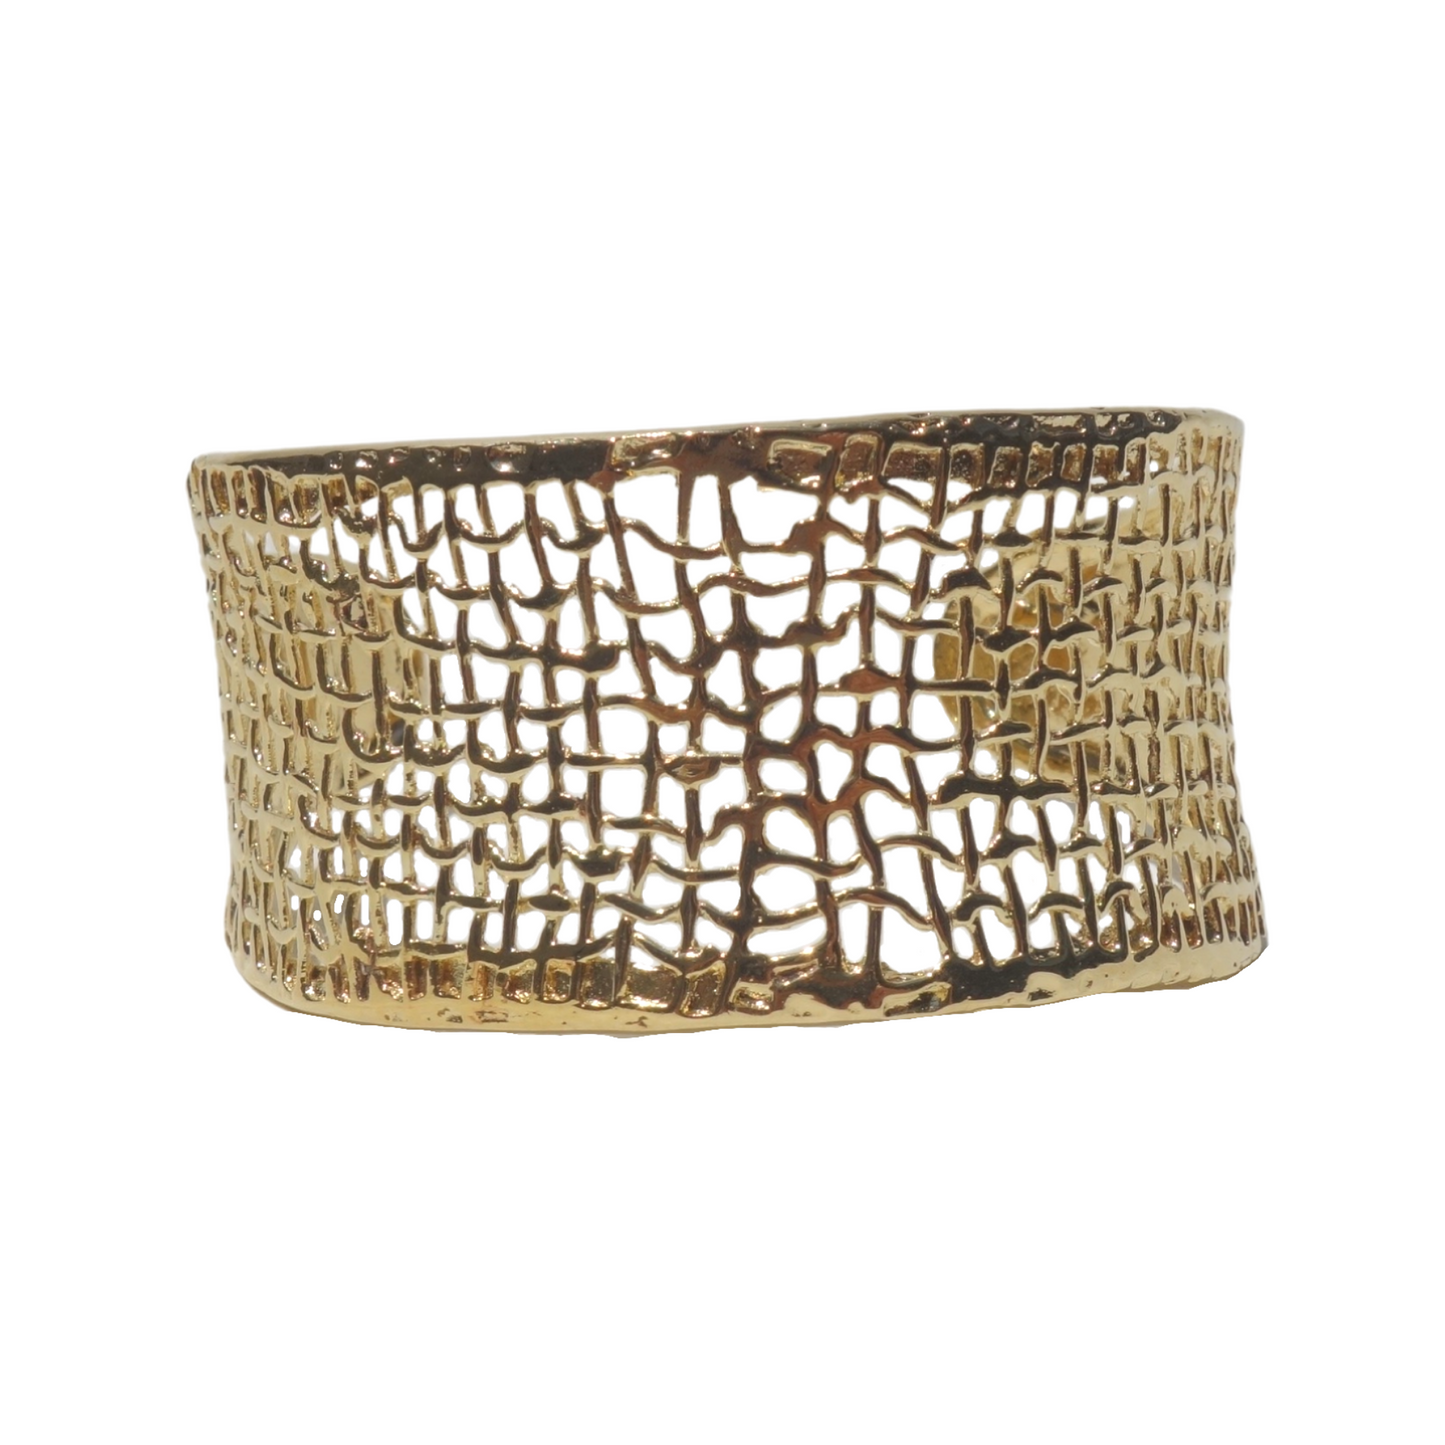 Elevate your jewelry collection with this stunning 14K solid yellow gold bracelet. The wide net textured design creates a unique and luxurious look. The bracelet measures 14cm in length and 30mm in width, making it a bold statement piece. Carefully labeled and stamped with 14K, this piece comes in a gift box for added elegance. Enjoy free shipping and trust us for registered and insured delivery. Order now and add this gorgeous piece to your collection.